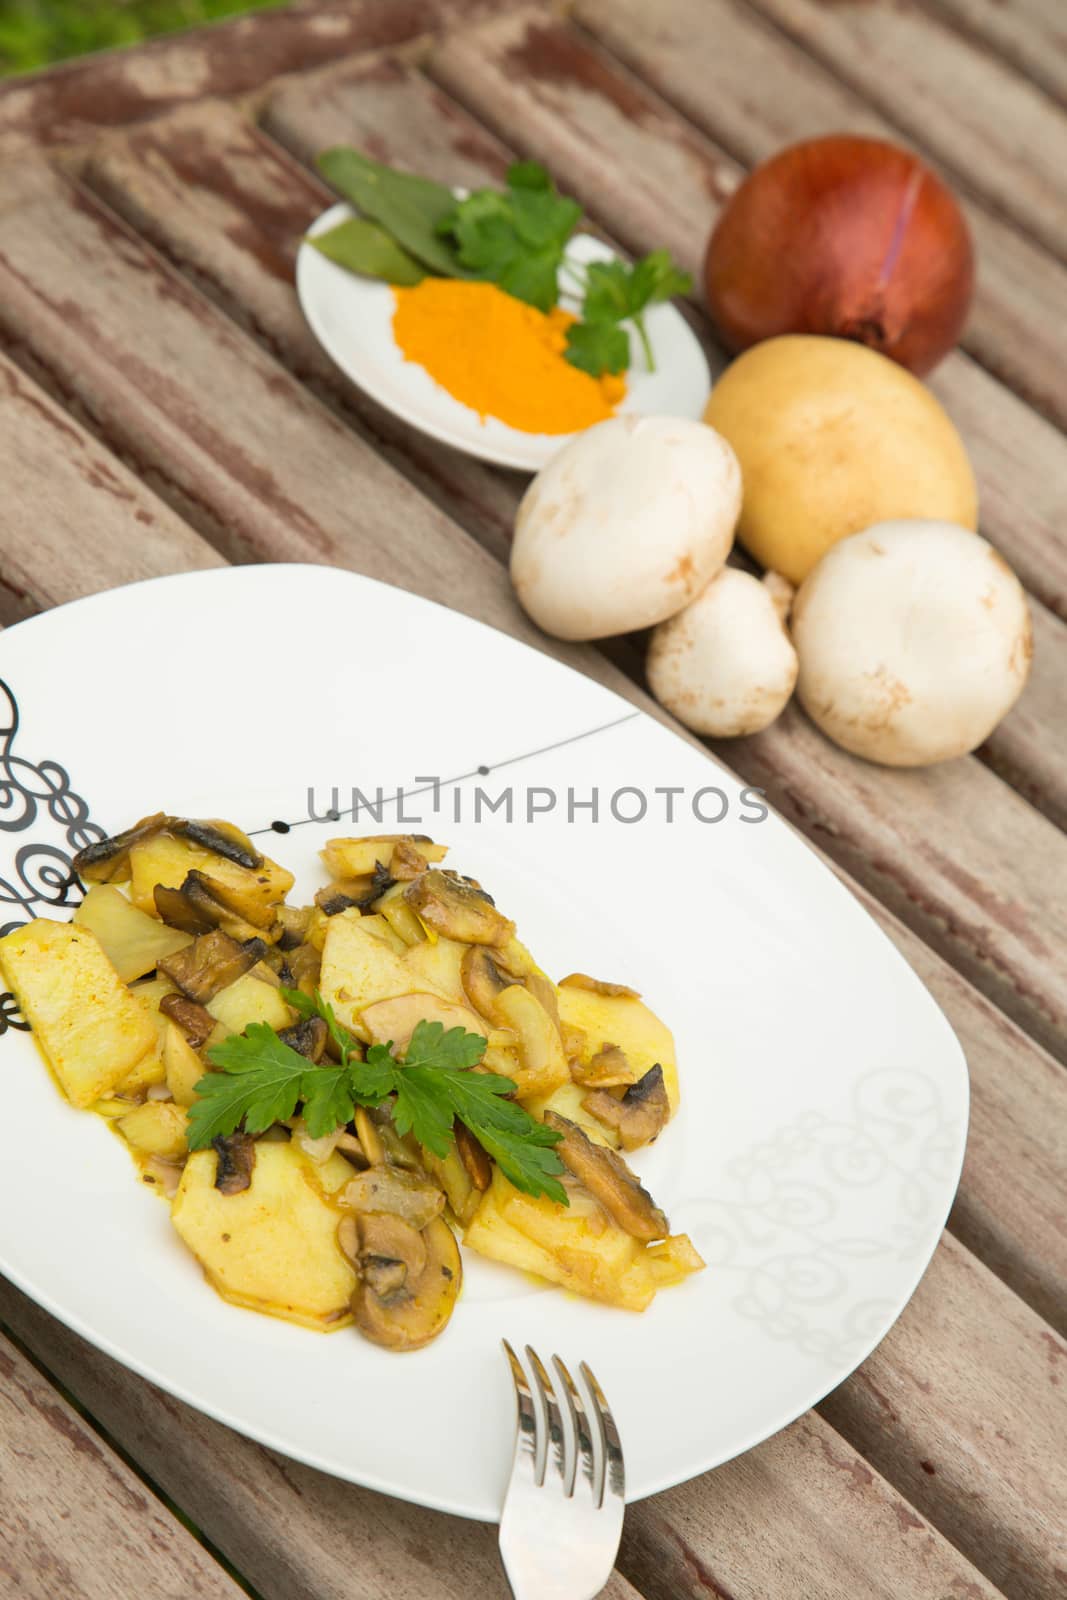 Baked potatoes with mushrooms and curcuma by tolikoff_photography